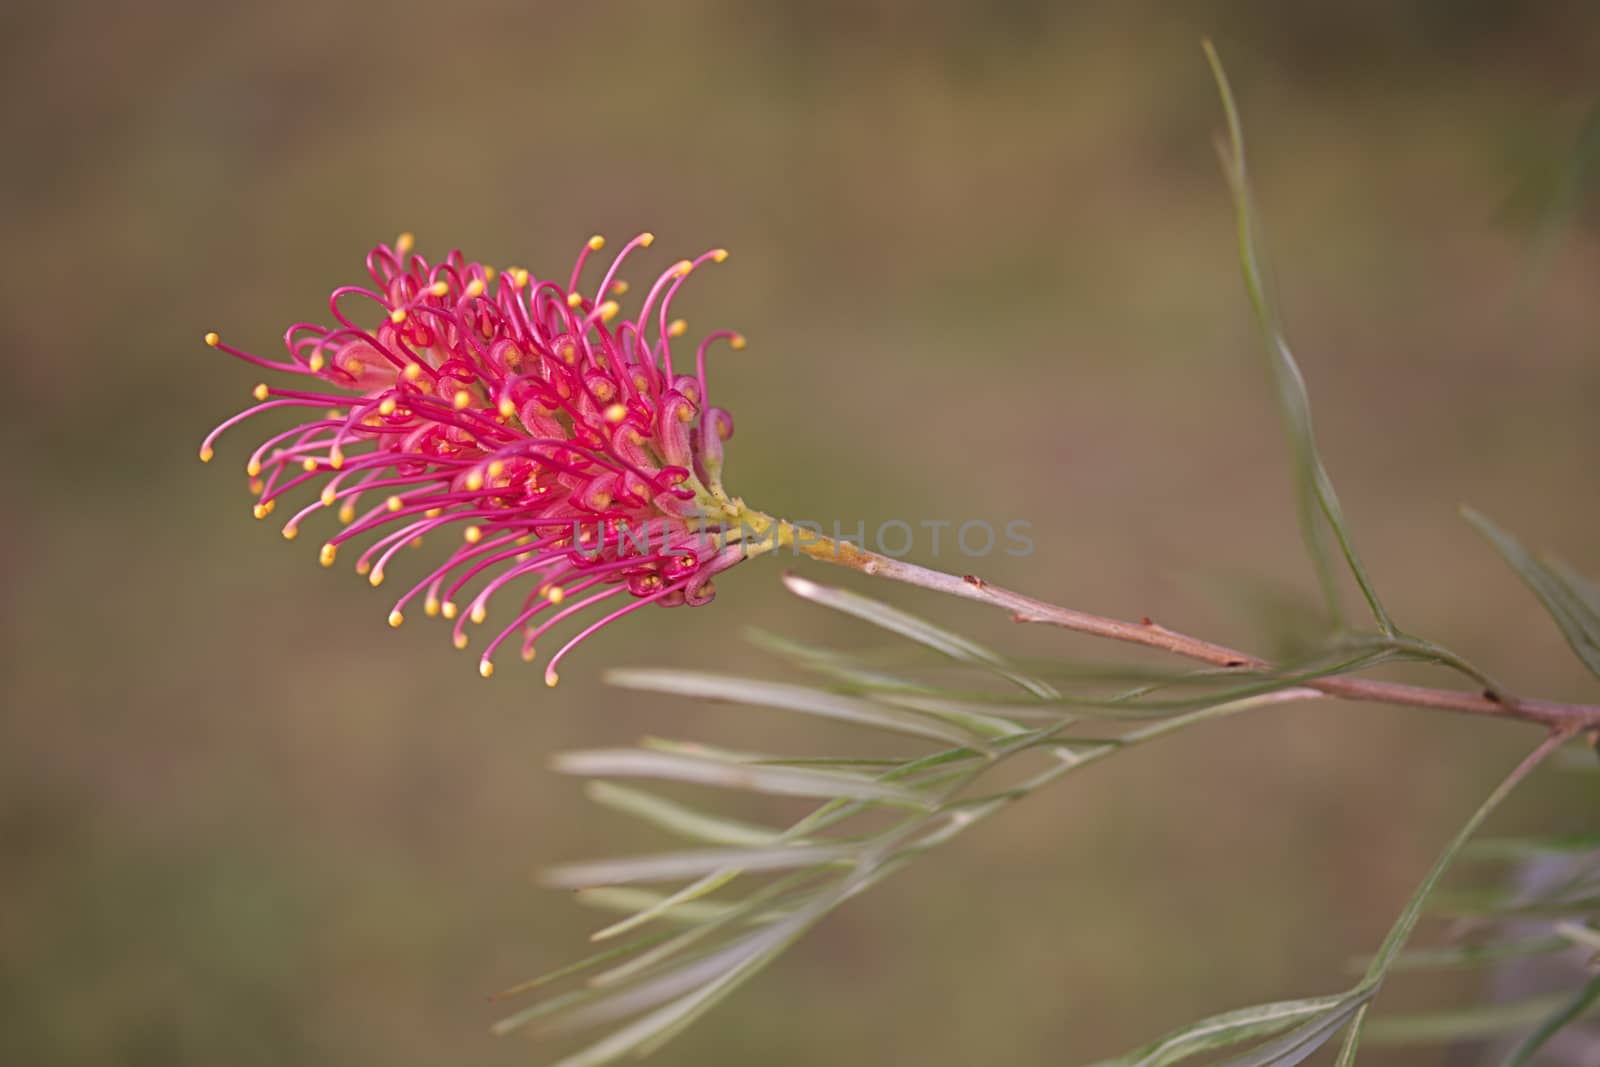 One of the typical flower heads of Australian native wildflower Grevillea growing in bushland